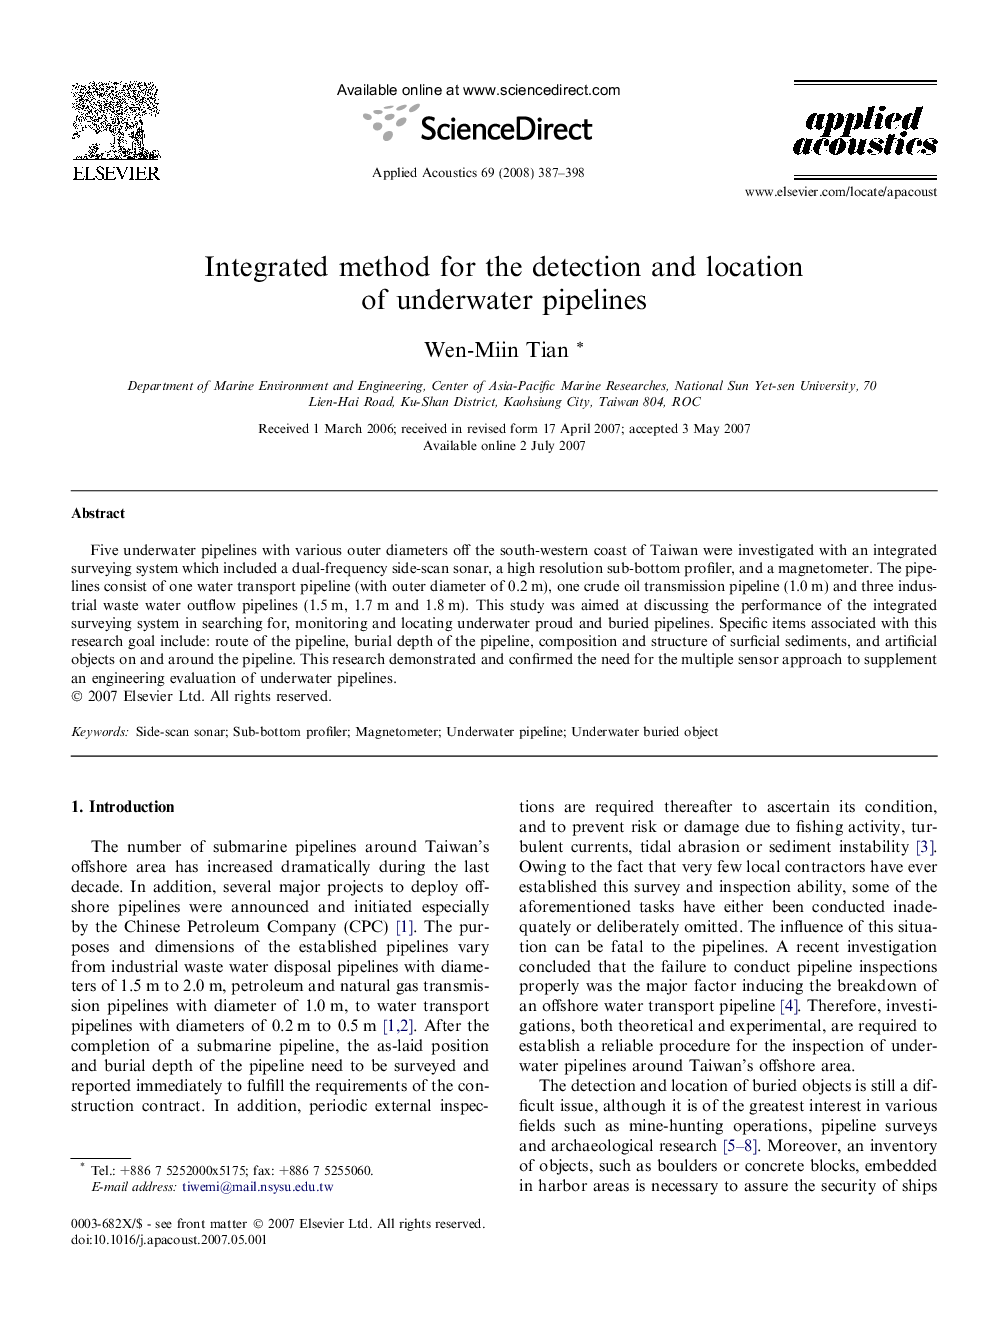 Integrated method for the detection and location of underwater pipelines